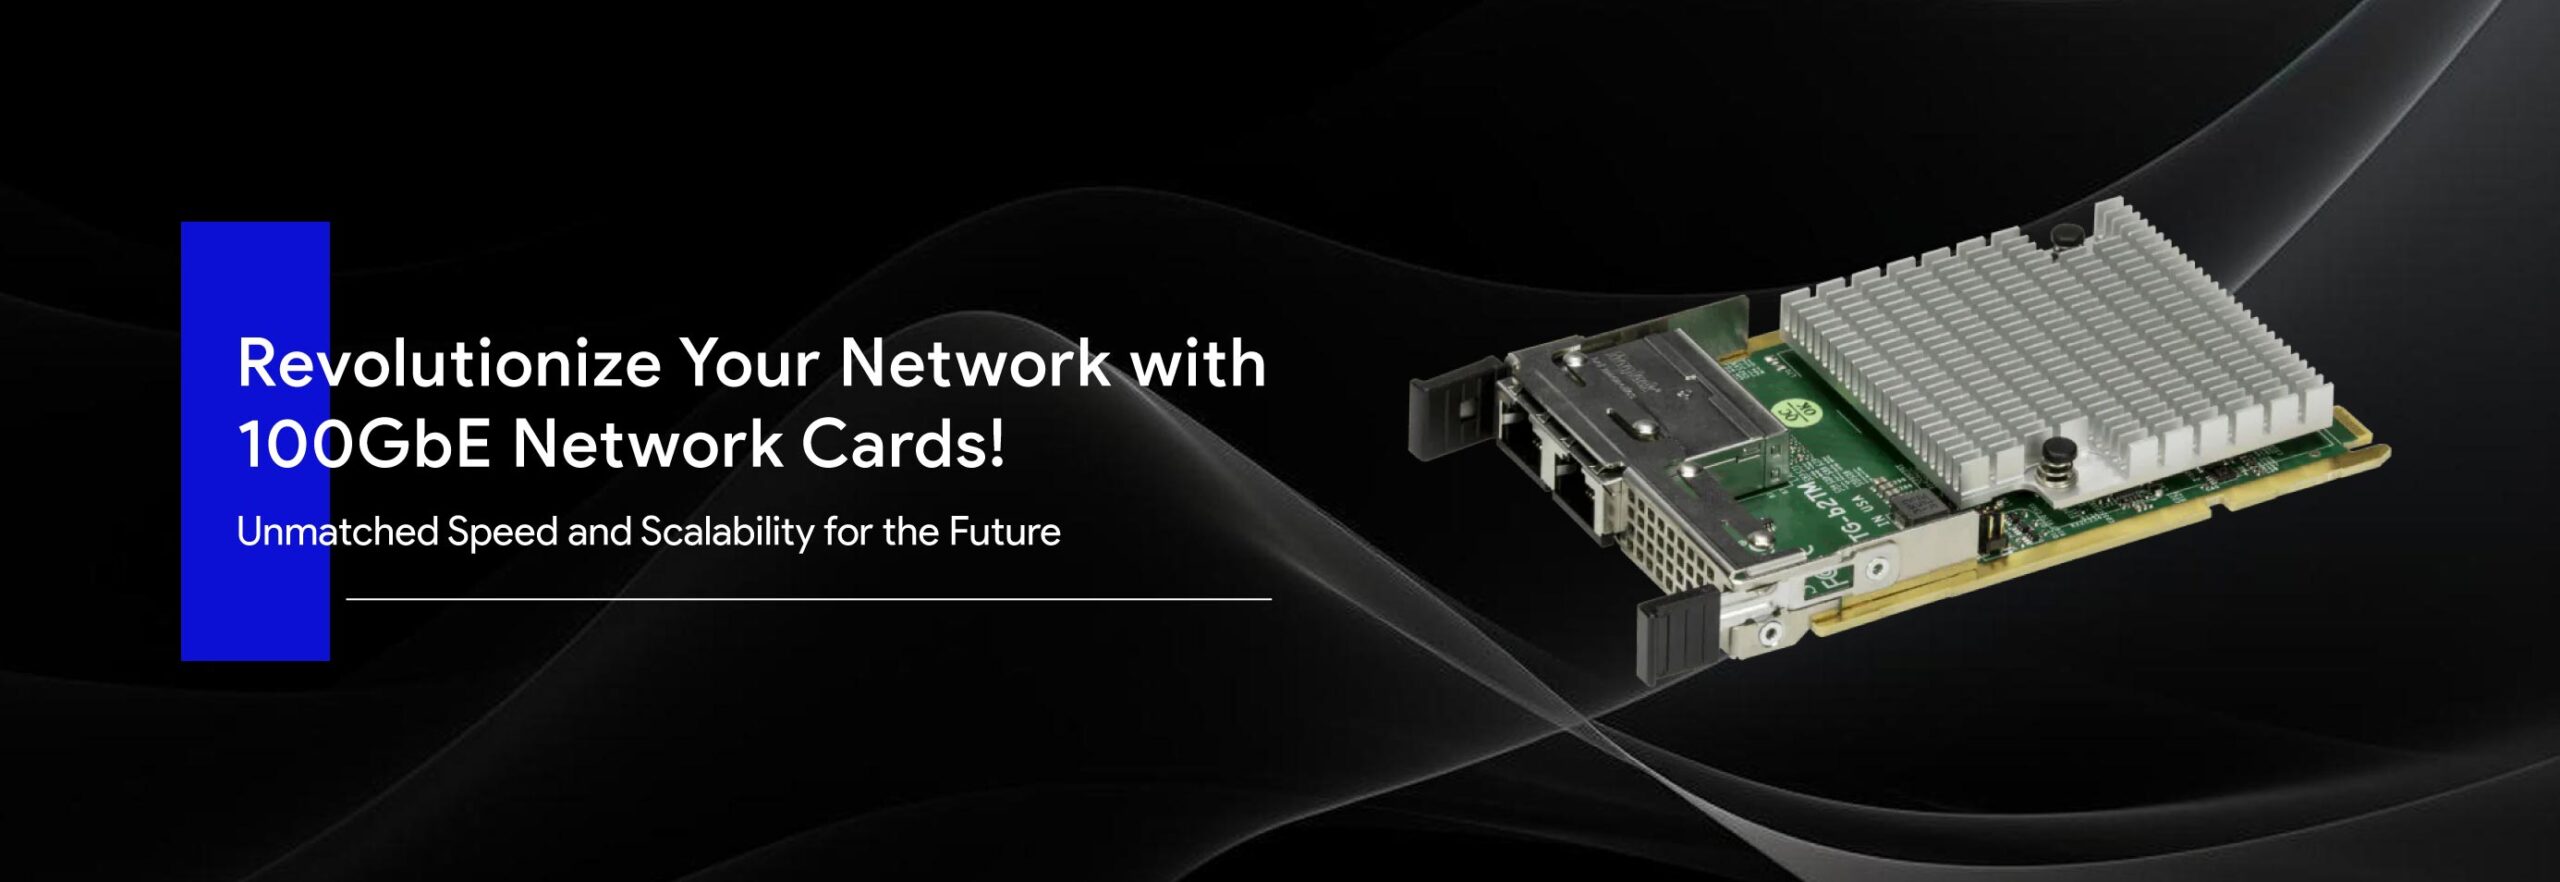 100GbE-Network-Cards